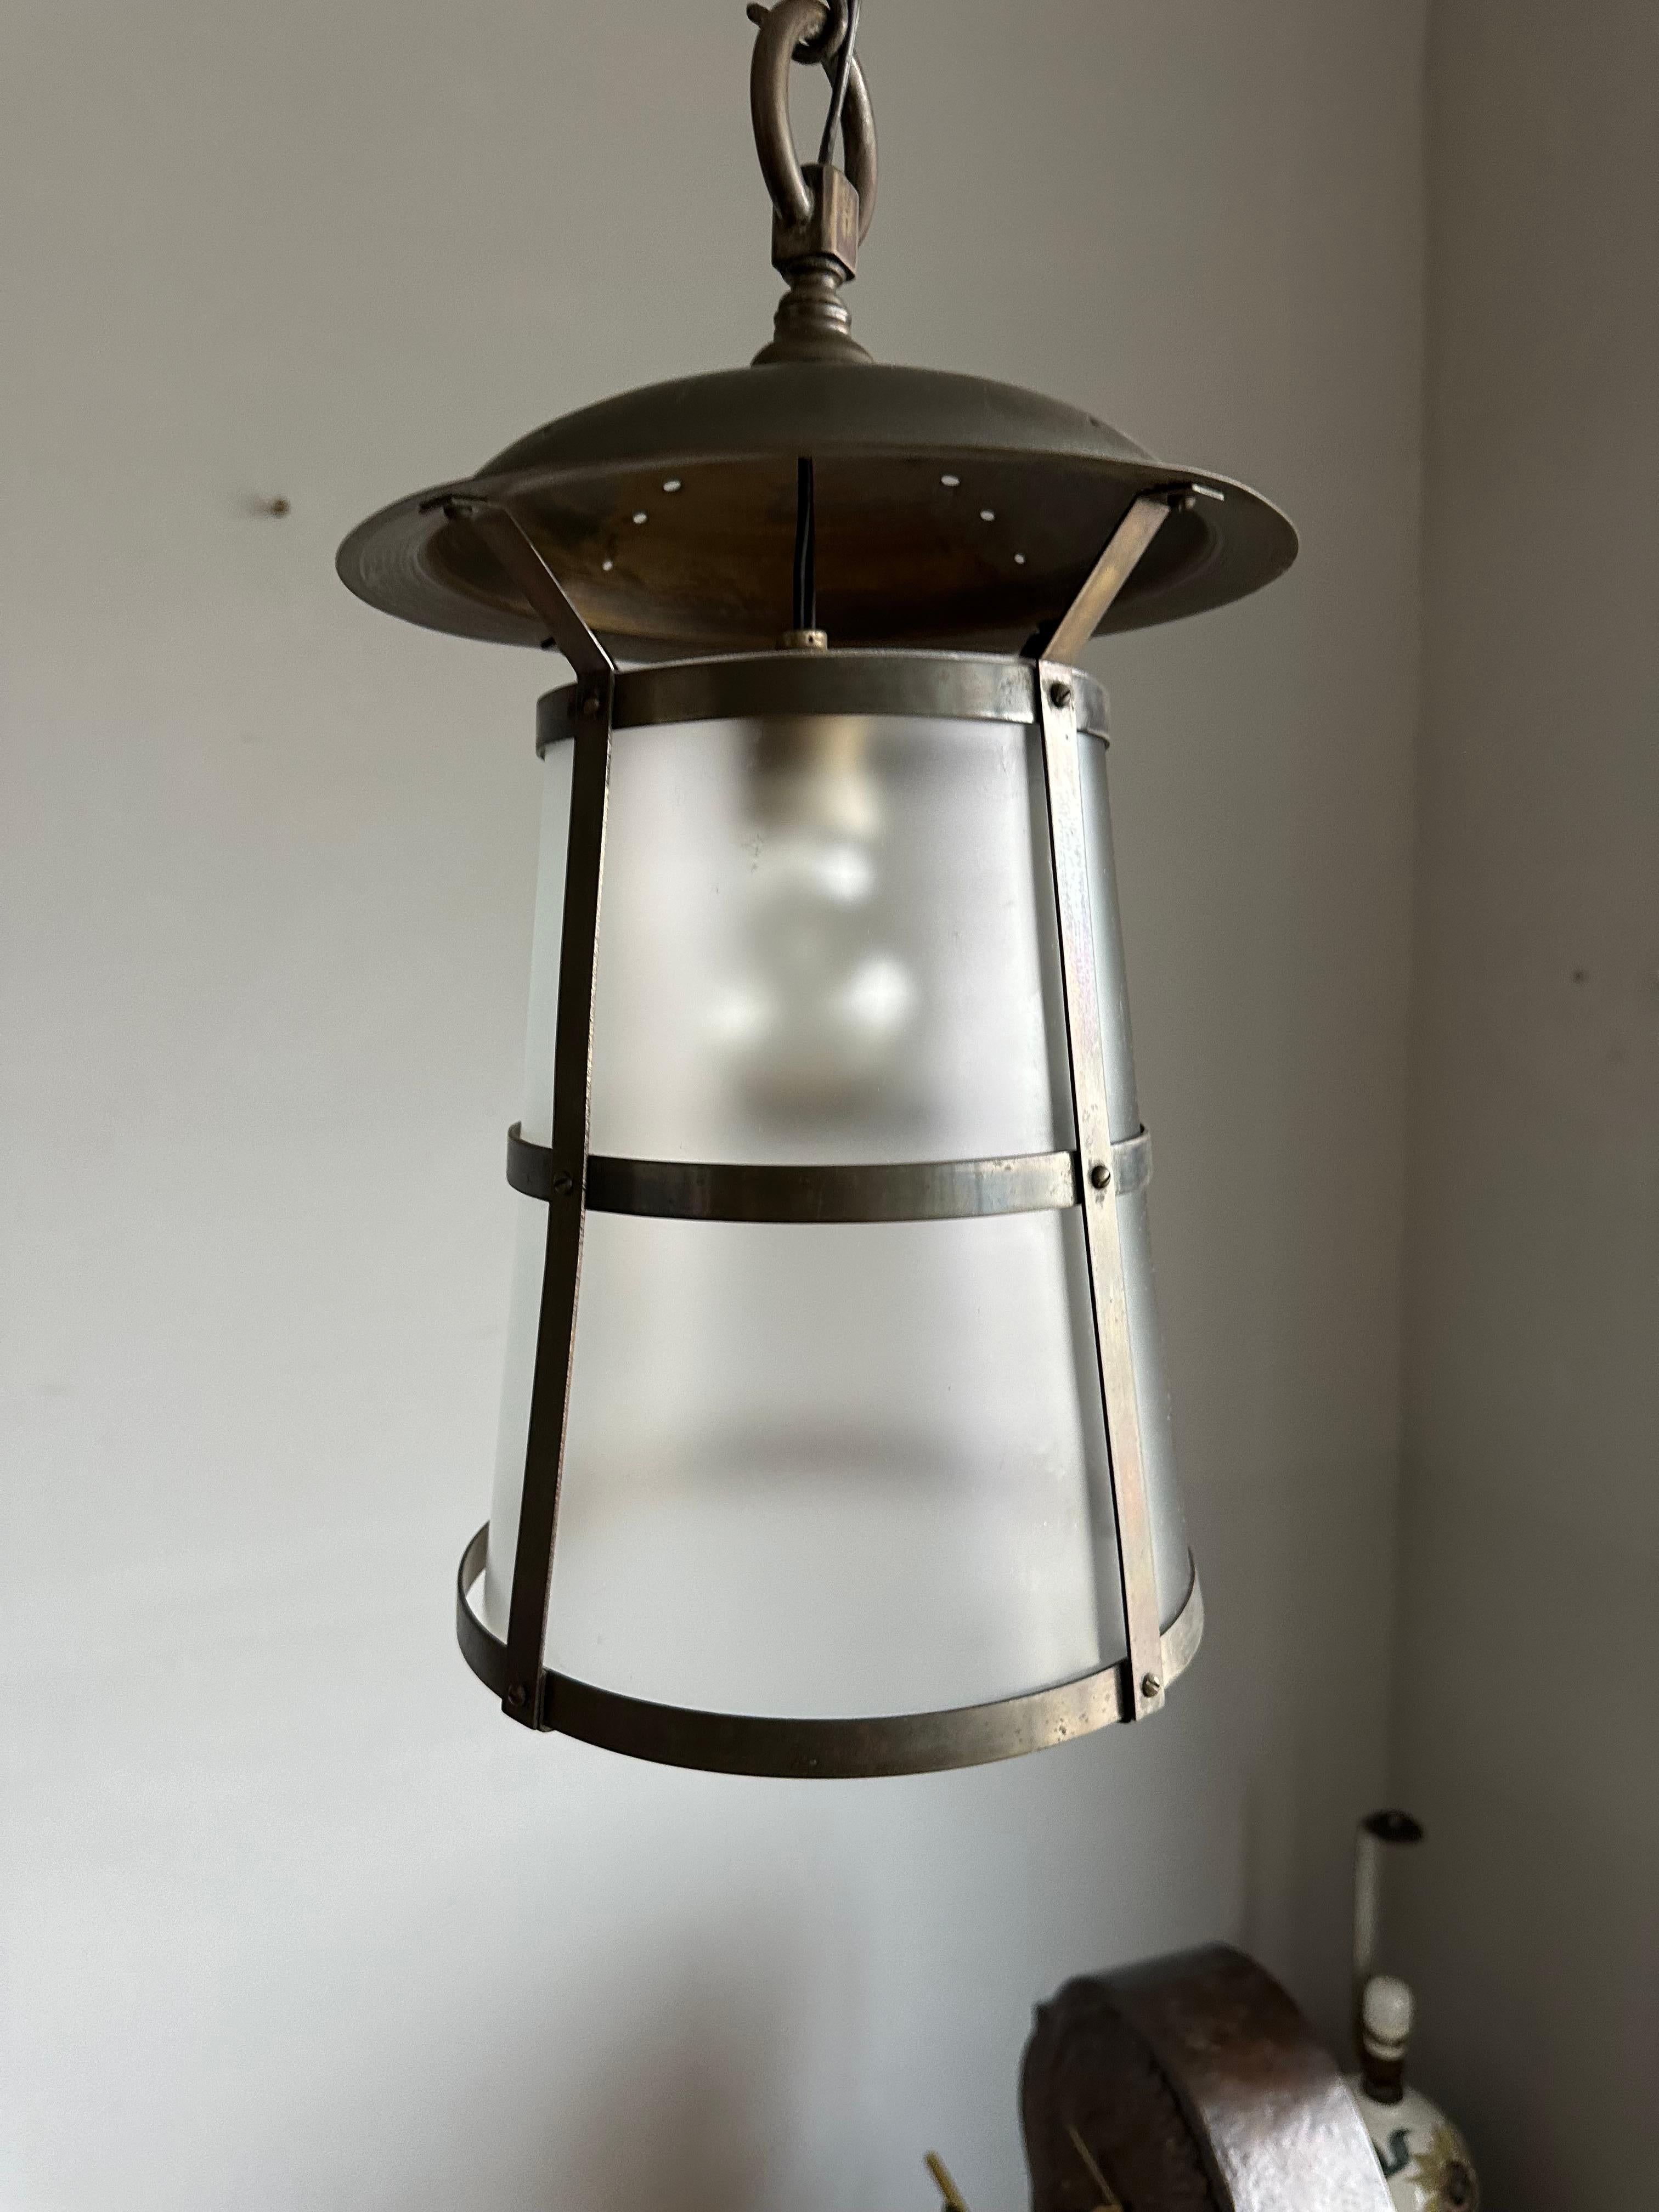 Dutch Highly Stylish Brass and Glass Arts & Crafts Pendant Light, 1910 Berlage Style For Sale